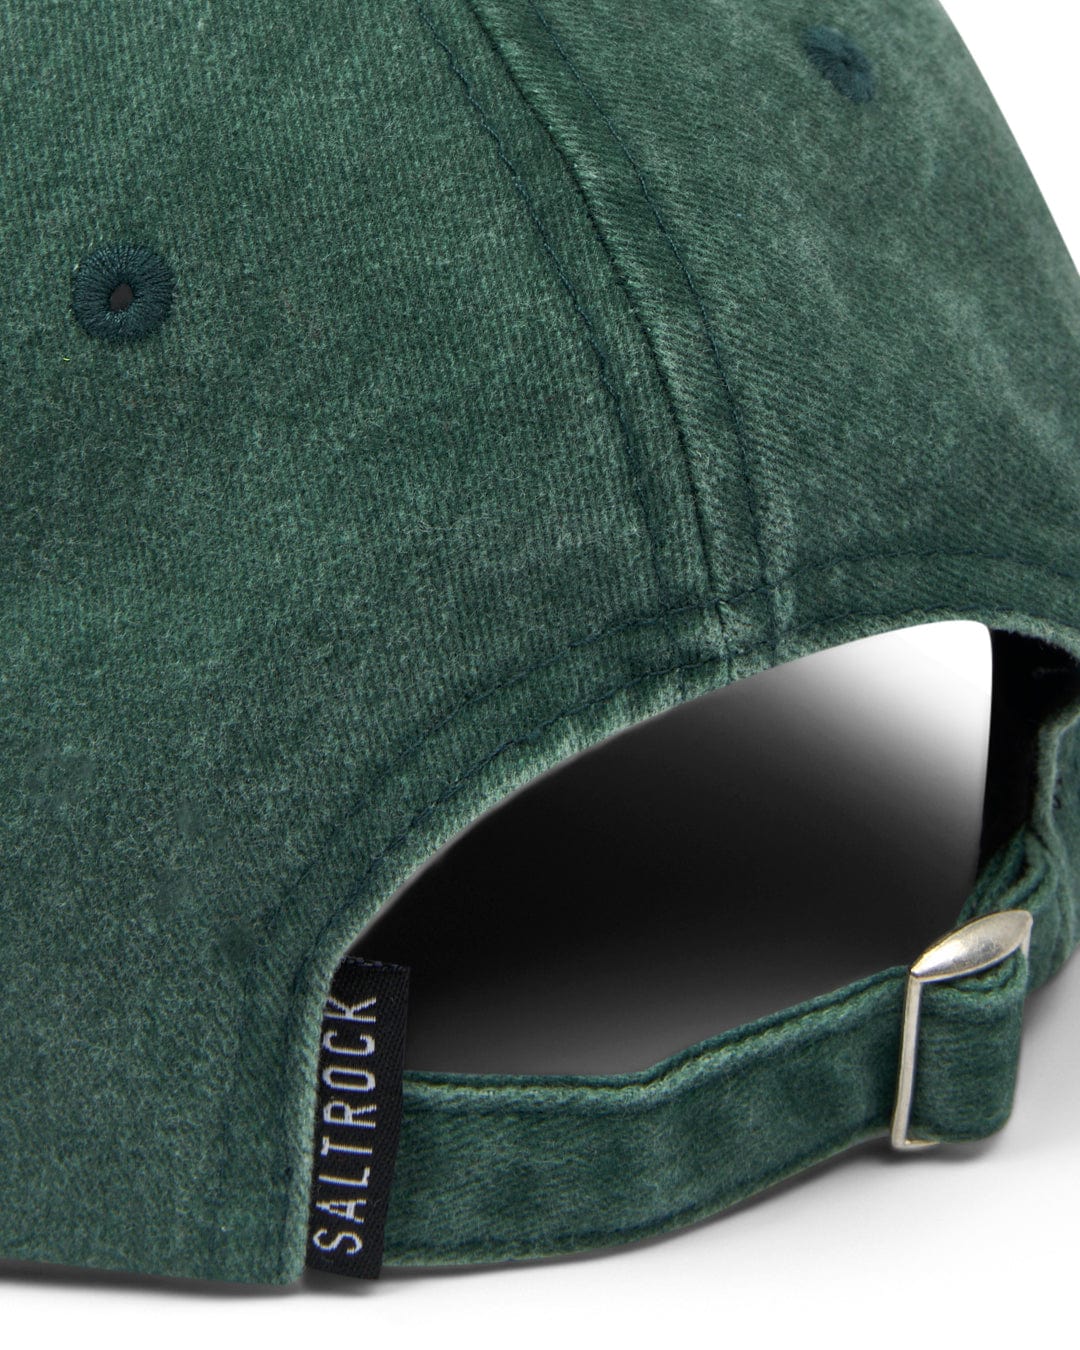 Saltrock Palm Cap in Green with adjustable strap and ventilation eyelets.